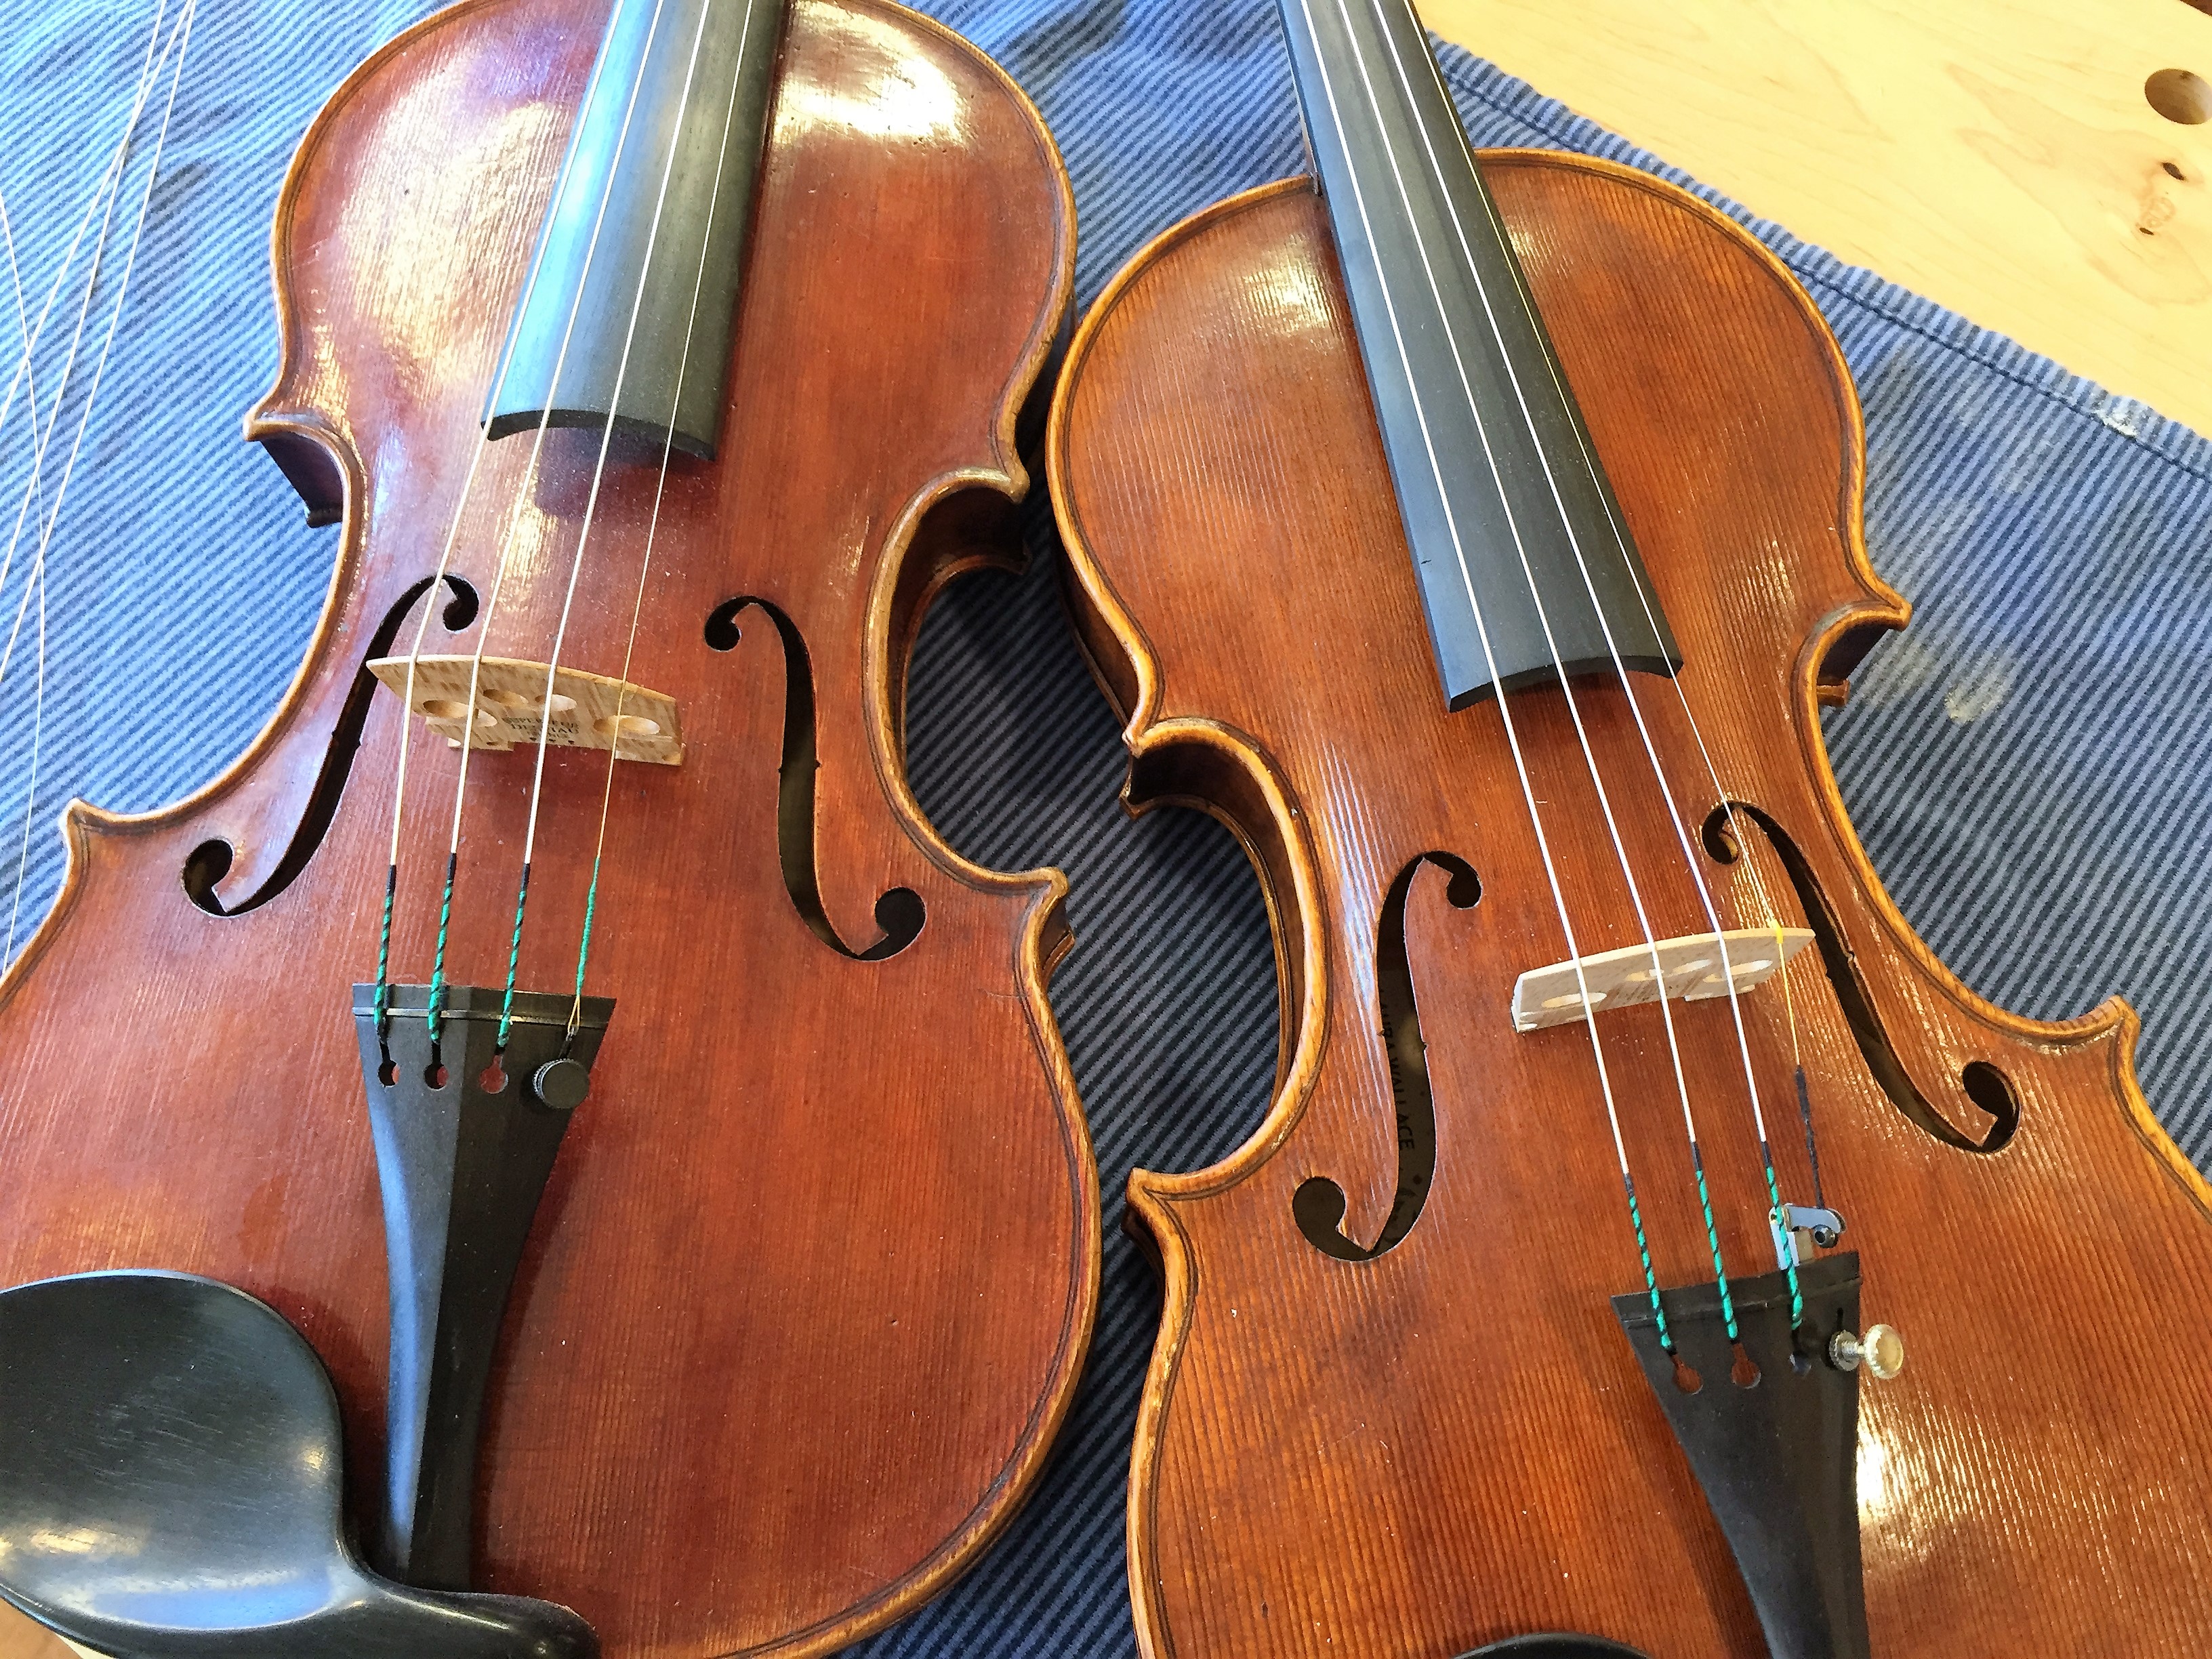 The twins: both build on a Strad Huberman model.